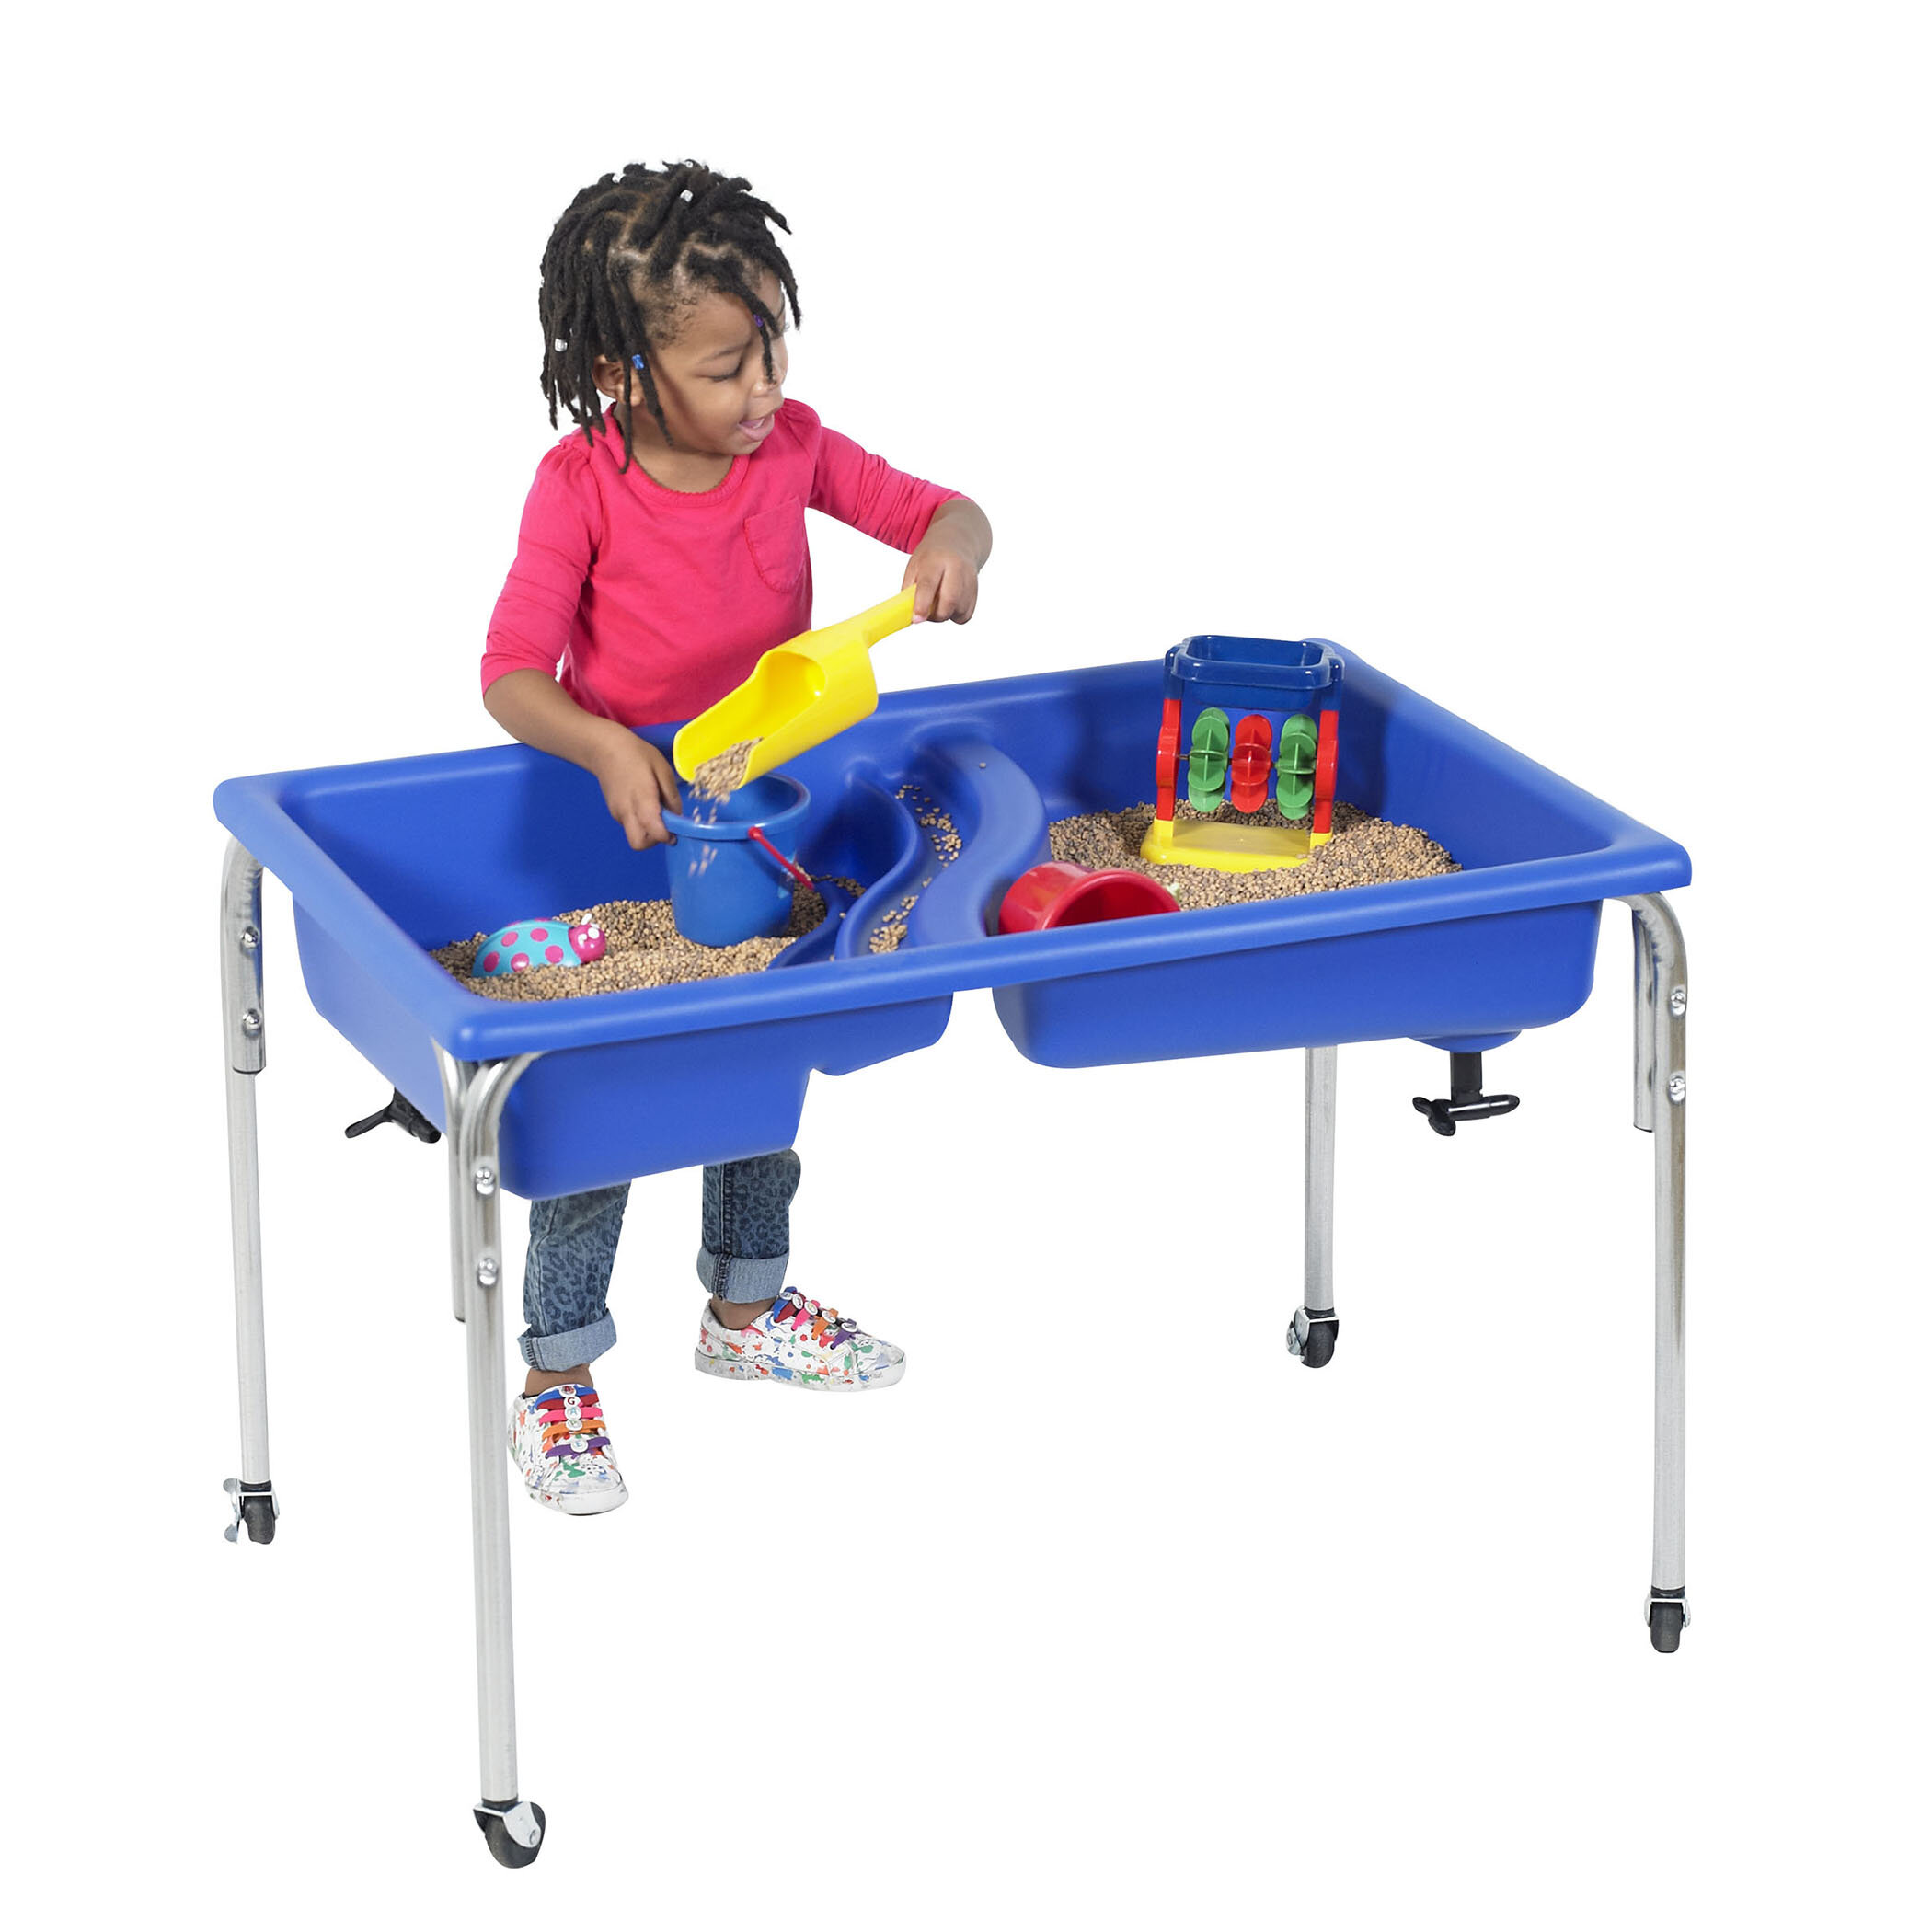 36” by 24” by 24” Lid for Safe and Clean Storage Children’s Factory Neptune Table and Lid Set Indoor or Outdoor Use Blue Double-Basin Sand and Water Table 